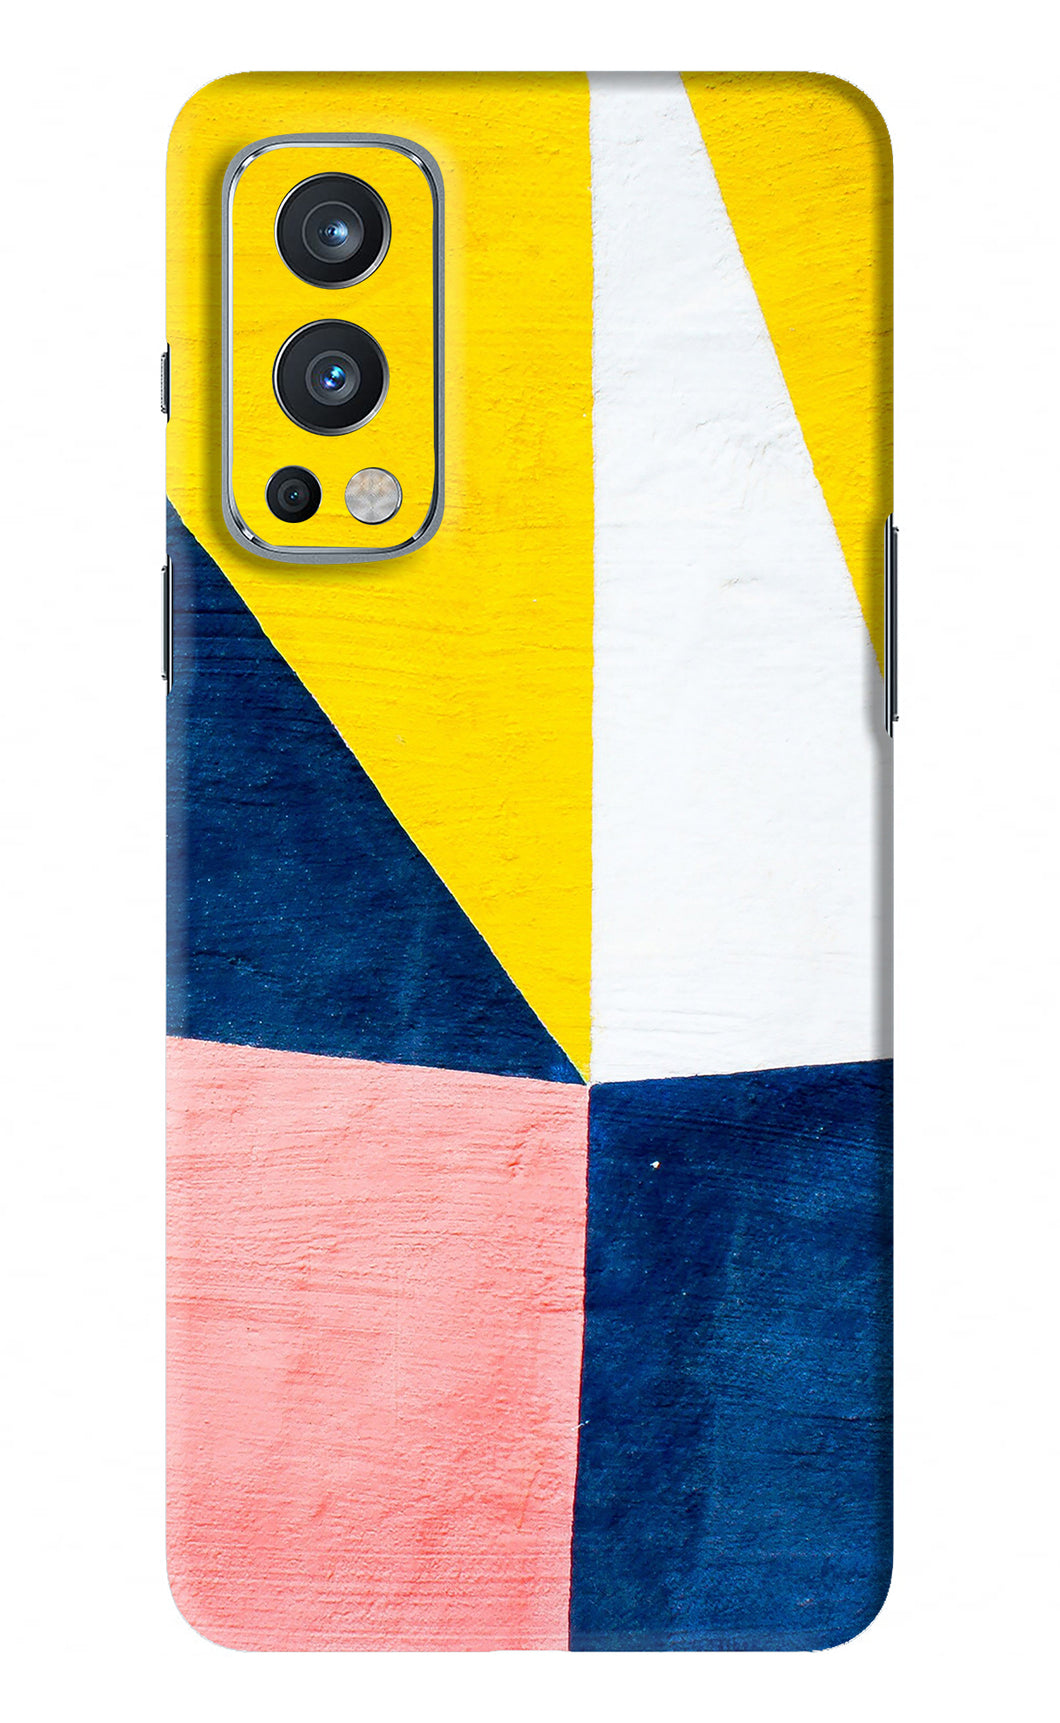 Colourful Art Oneplus Nord 2 Back Skin Wrap